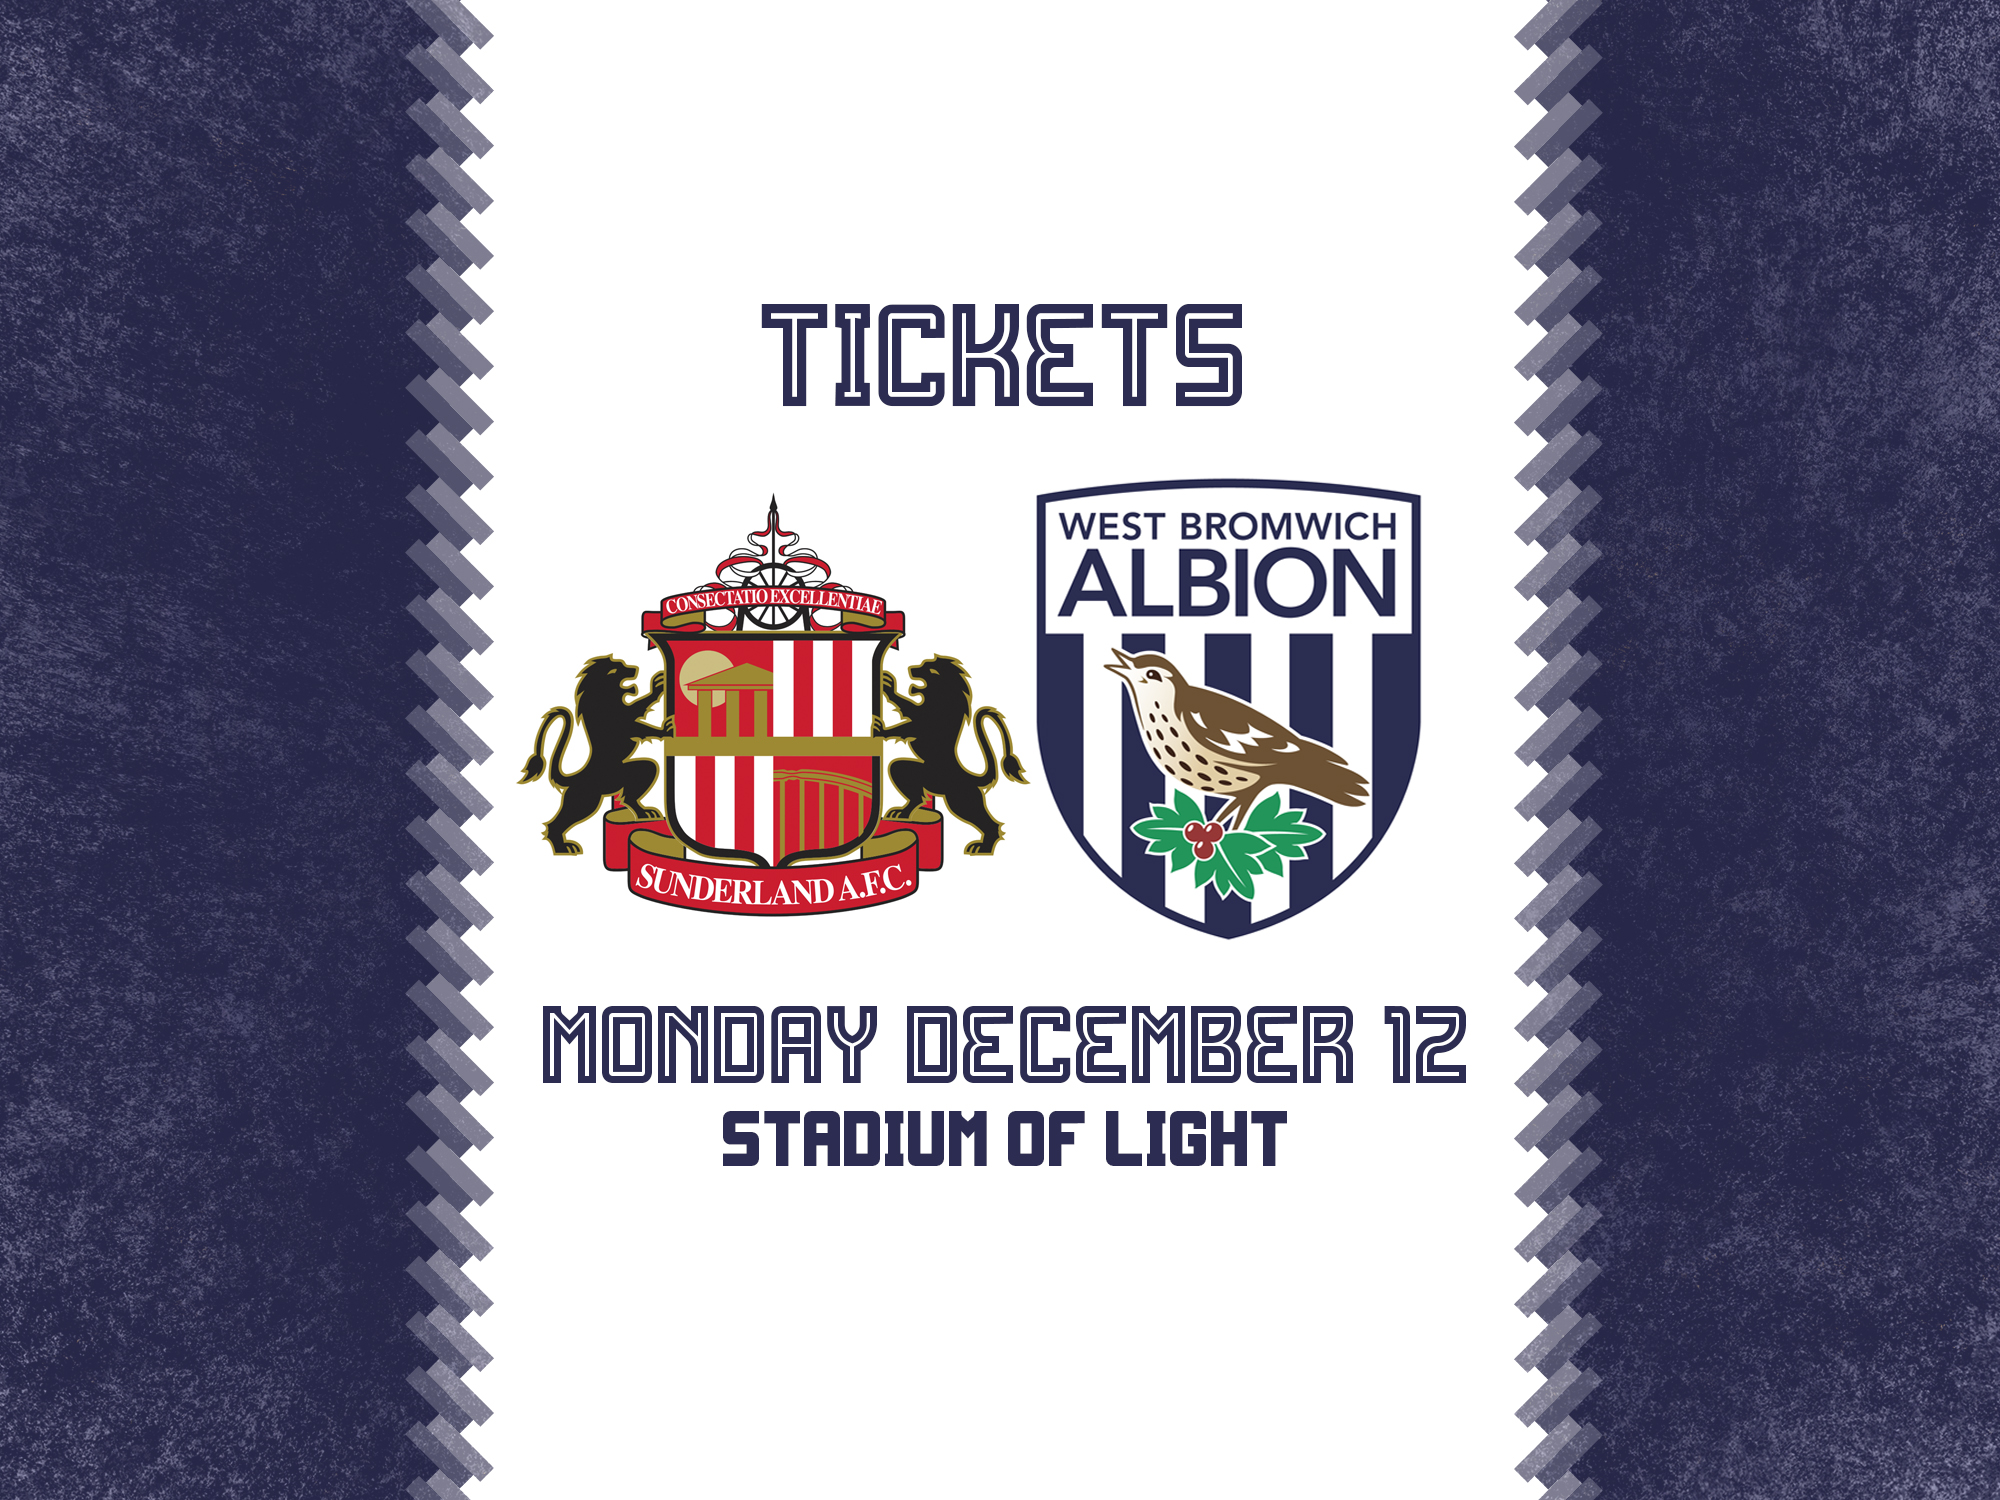 A ticket graphic, displaying the date (December 12) of the Sunderland v Albion Sky Bet Championship fixture